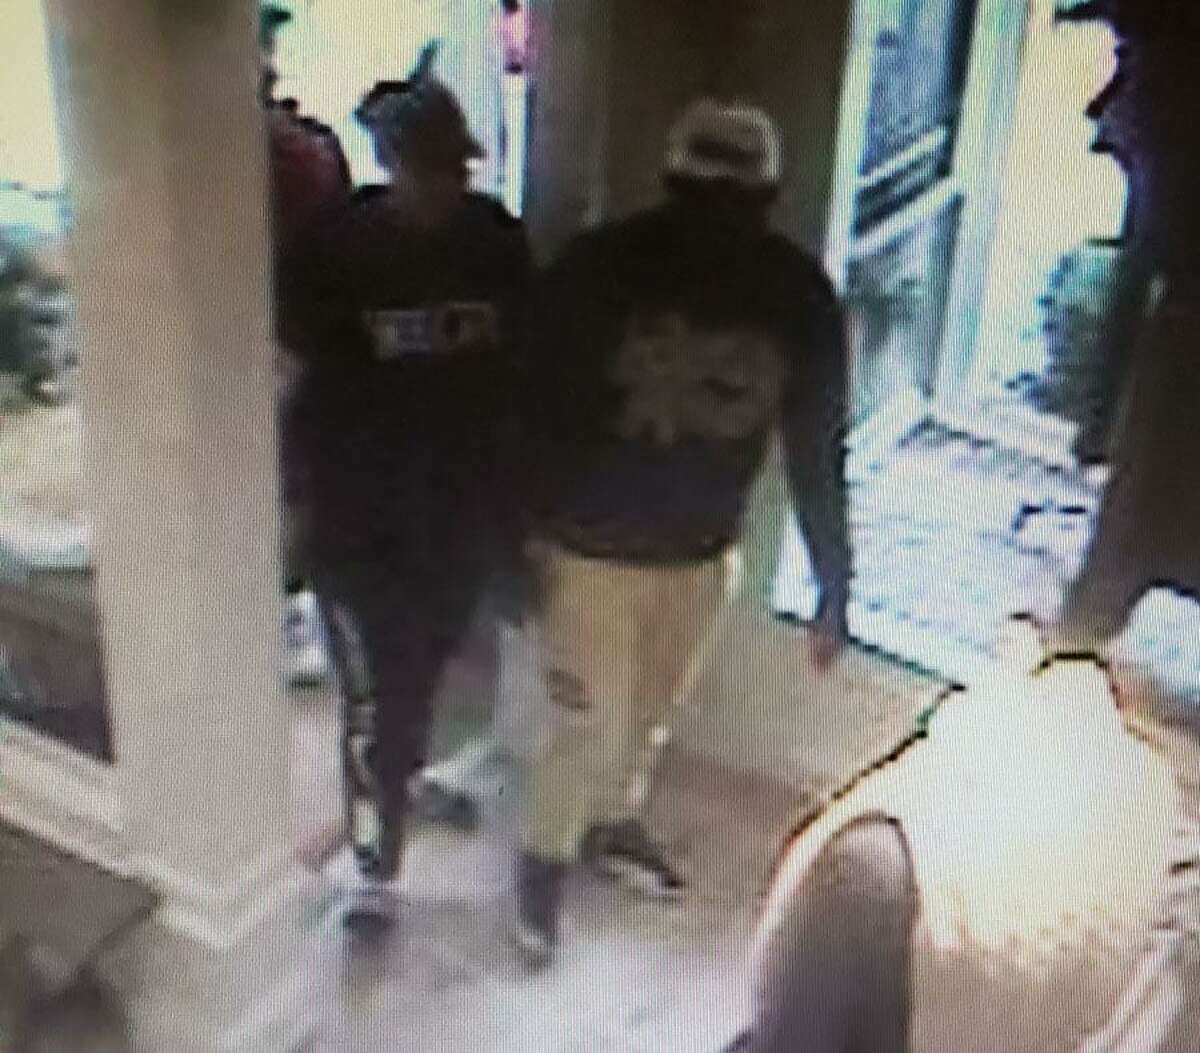 New Canaan Police have released surveillance footage of suspects in a theft at the Ralph Lauren store on Elm Street on Monday, Oct. 7, the third such shoplifting in a five-day span at the same store.